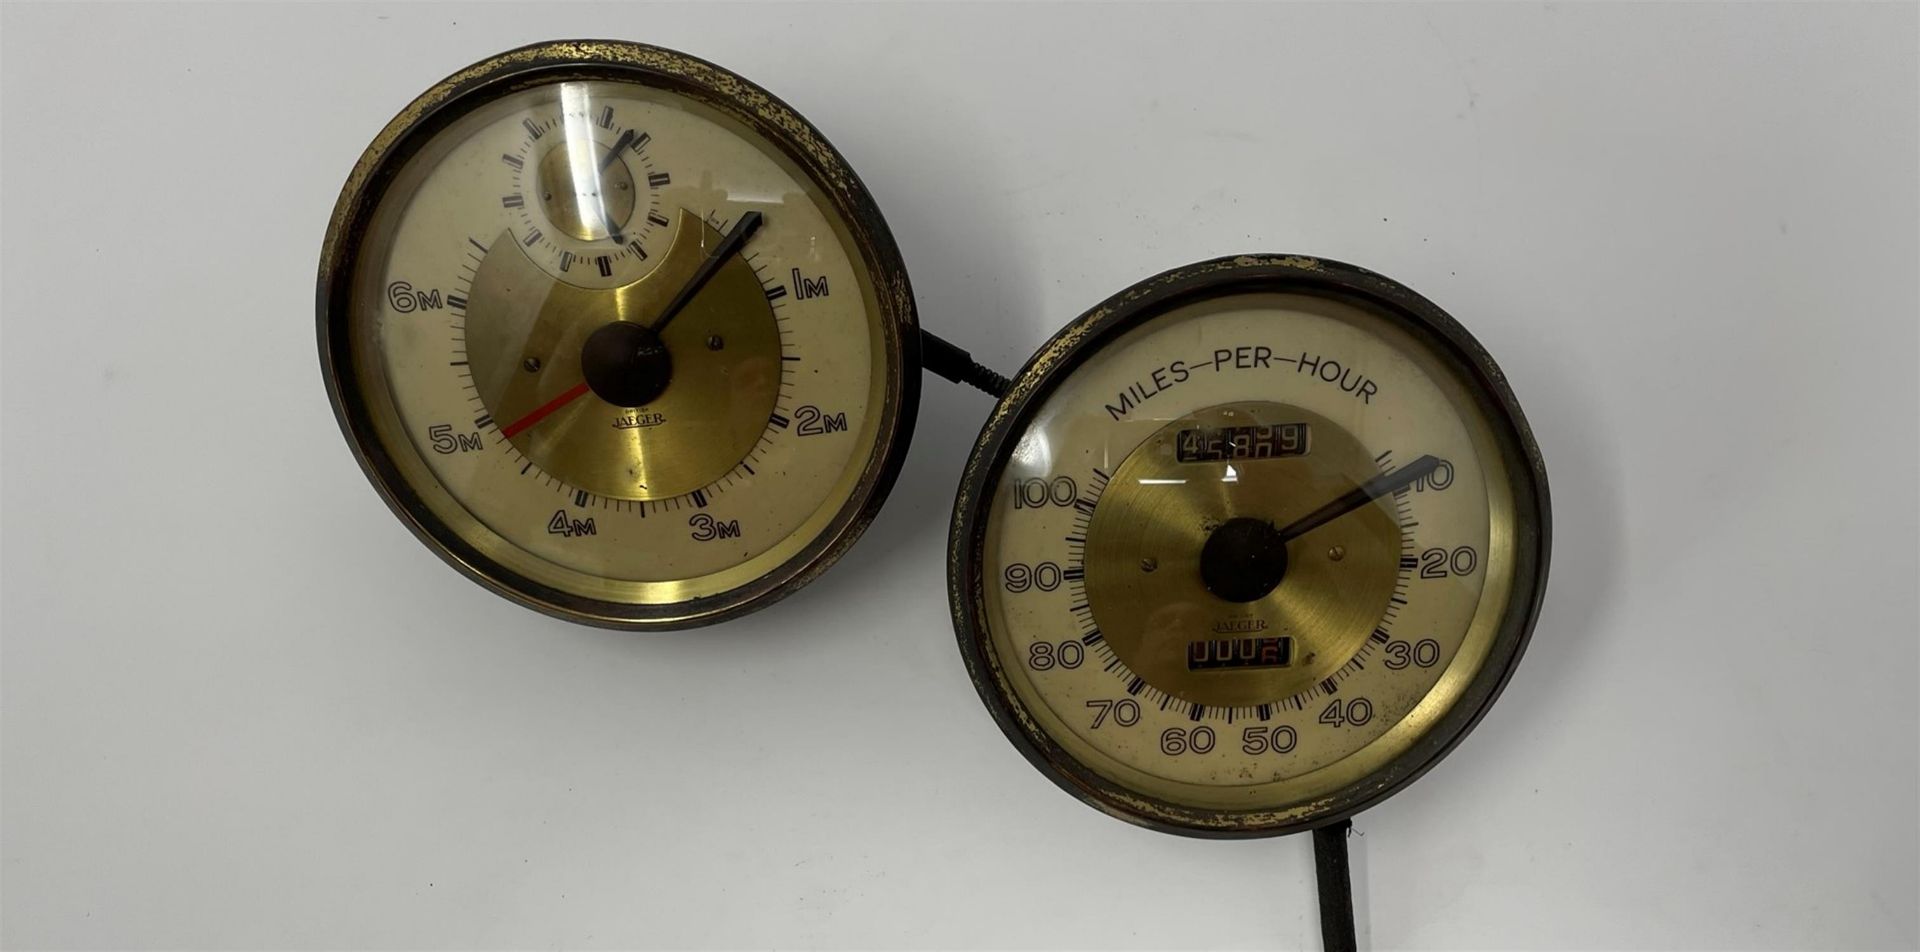 Pair of Pre-war Chronometric Instruments c1930s - Image 2 of 7